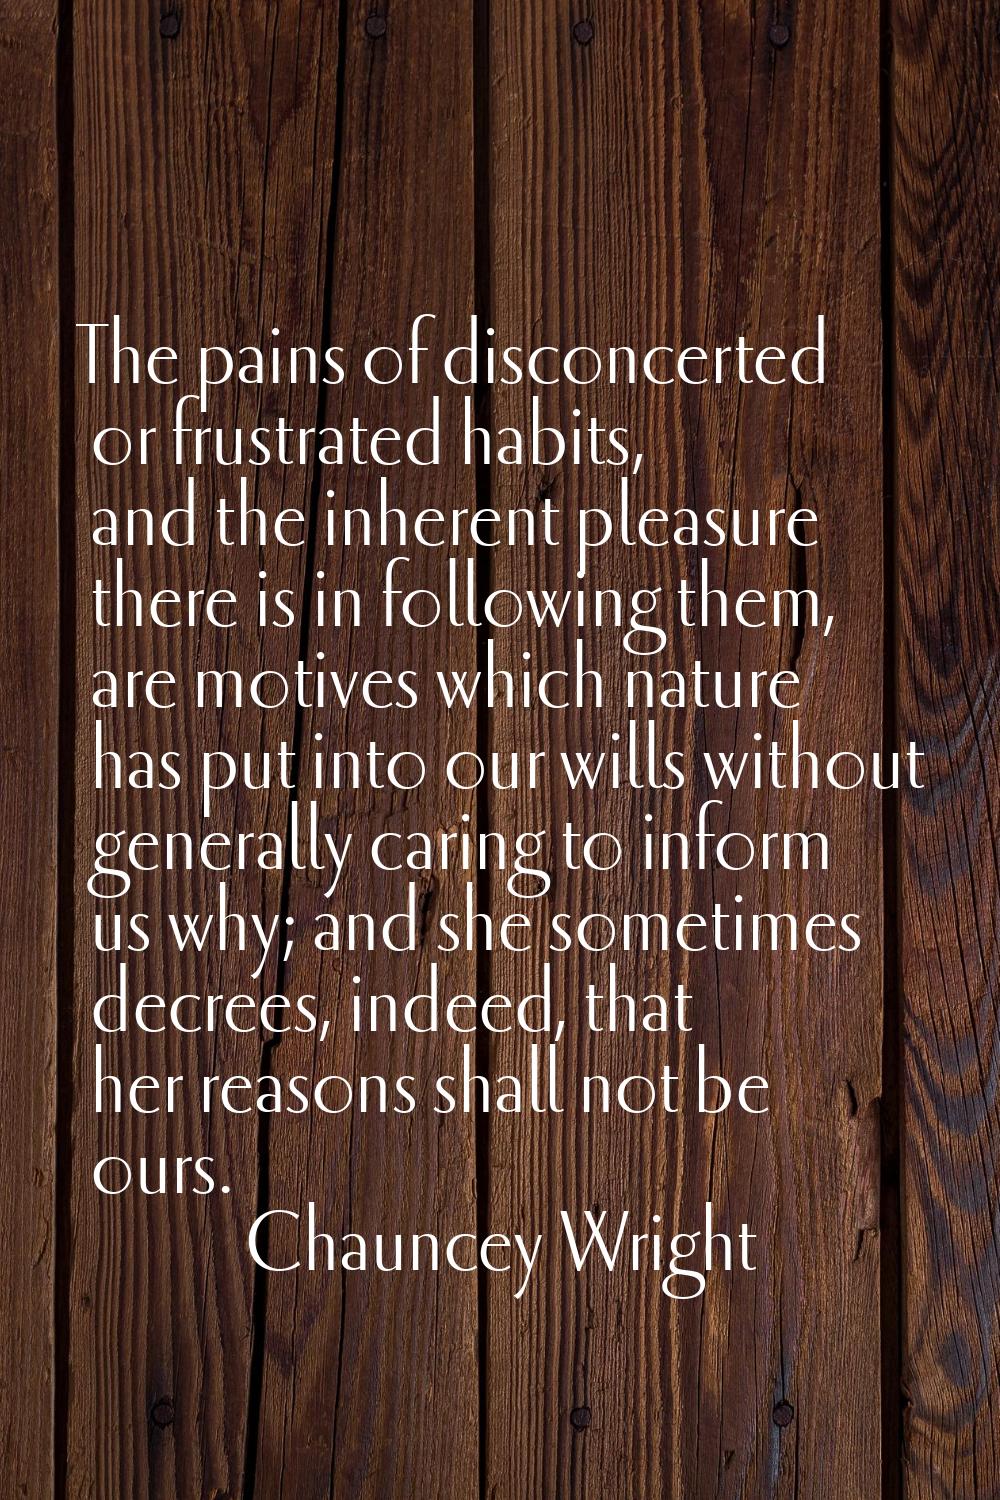 The pains of disconcerted or frustrated habits, and the inherent pleasure there is in following the